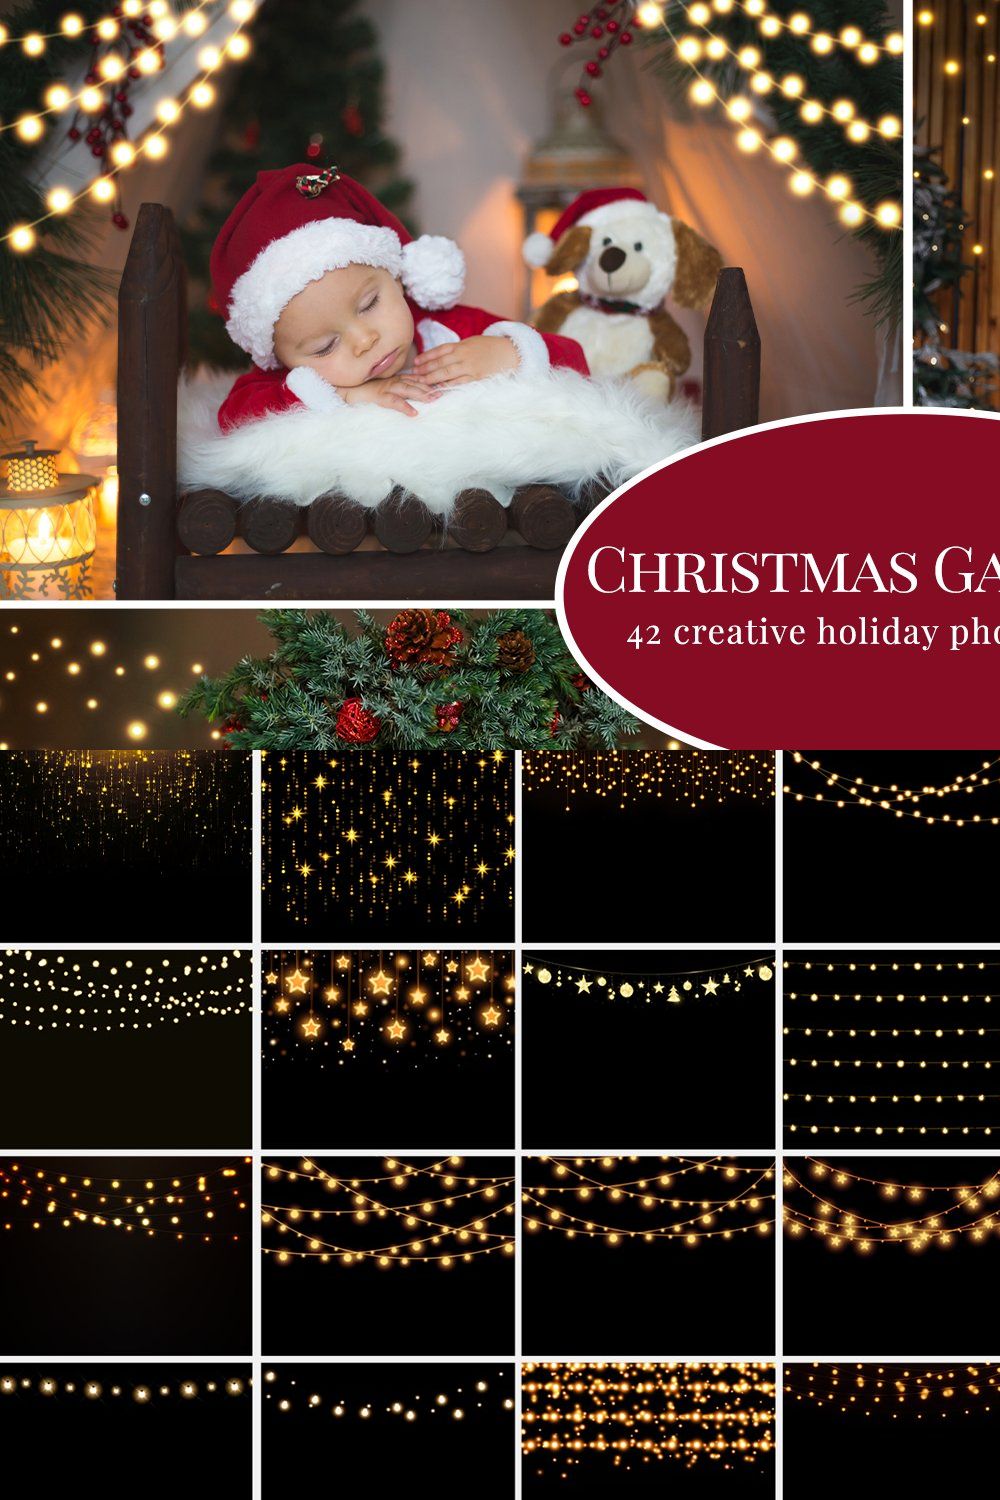 Christmas Garlands photo overlays pinterest preview image.